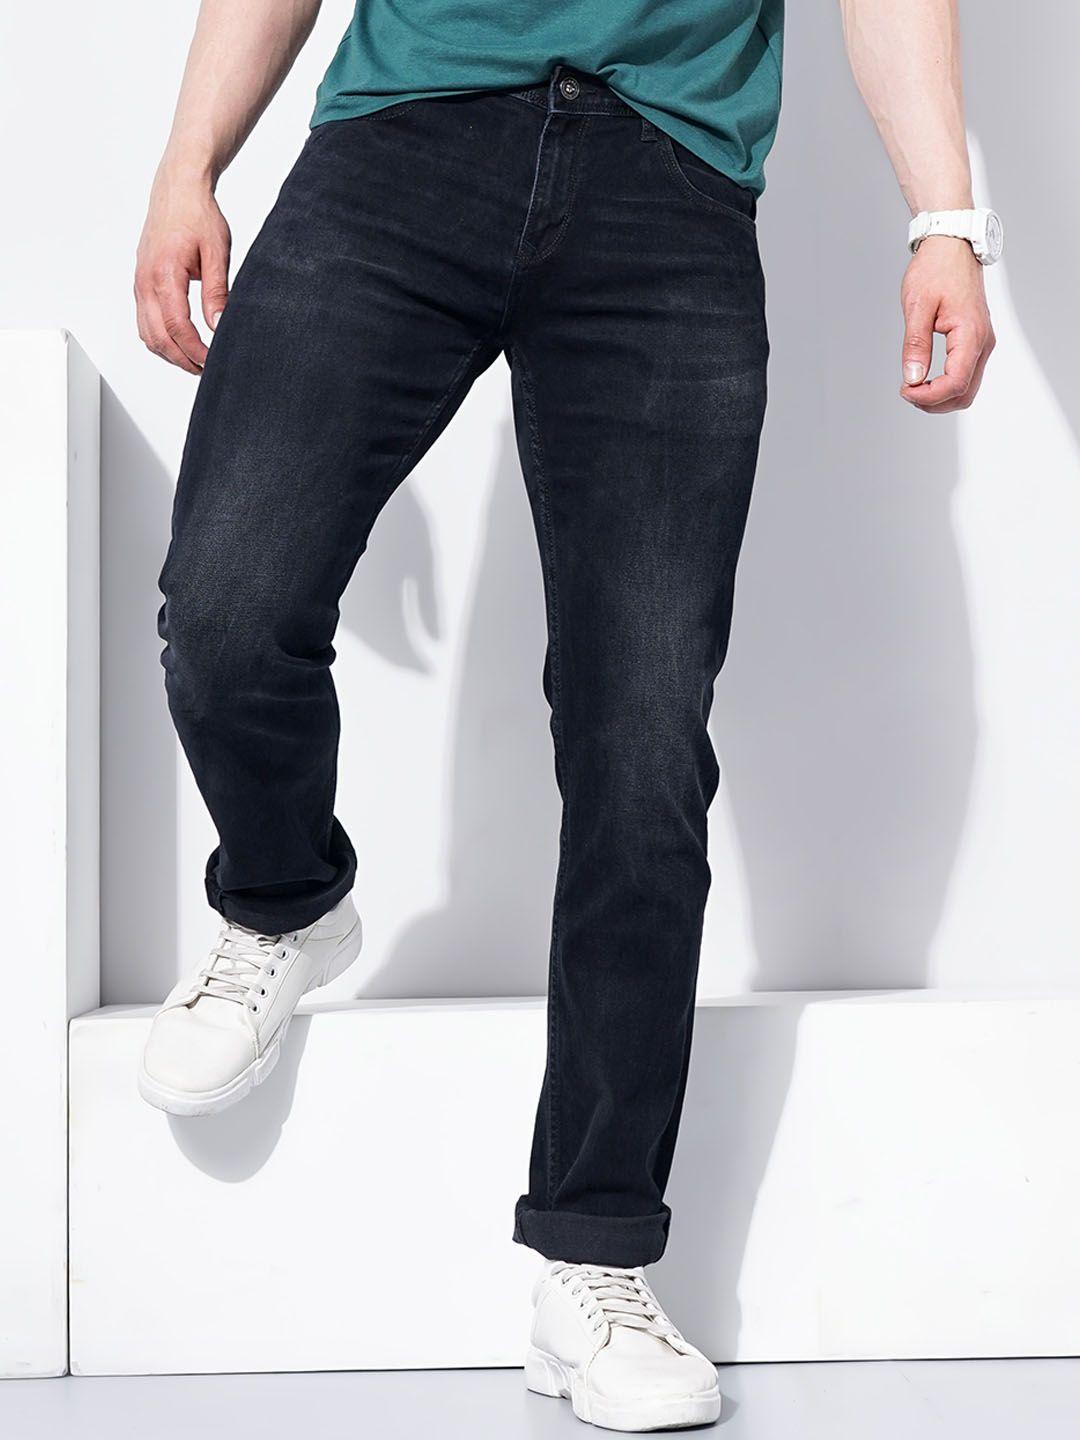 celio-men-jean-regular-fit-whiskers-and-chevrons-clean-look-light-fade-cotton-jeans